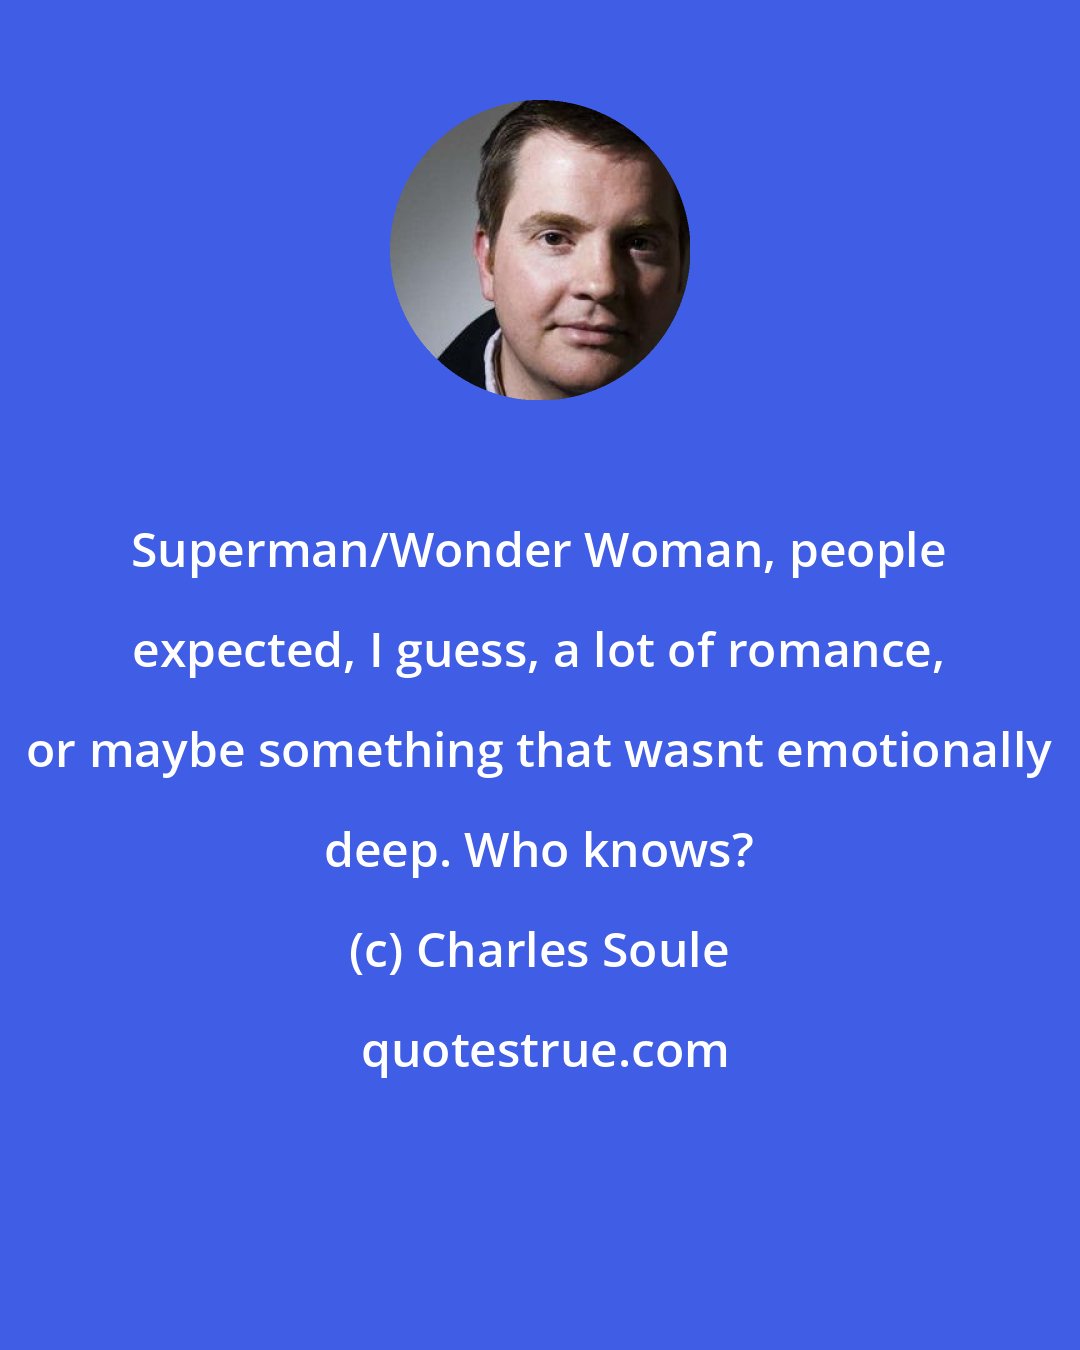 Charles Soule: Superman/Wonder Woman, people expected, I guess, a lot of romance, or maybe something that wasnt emotionally deep. Who knows?